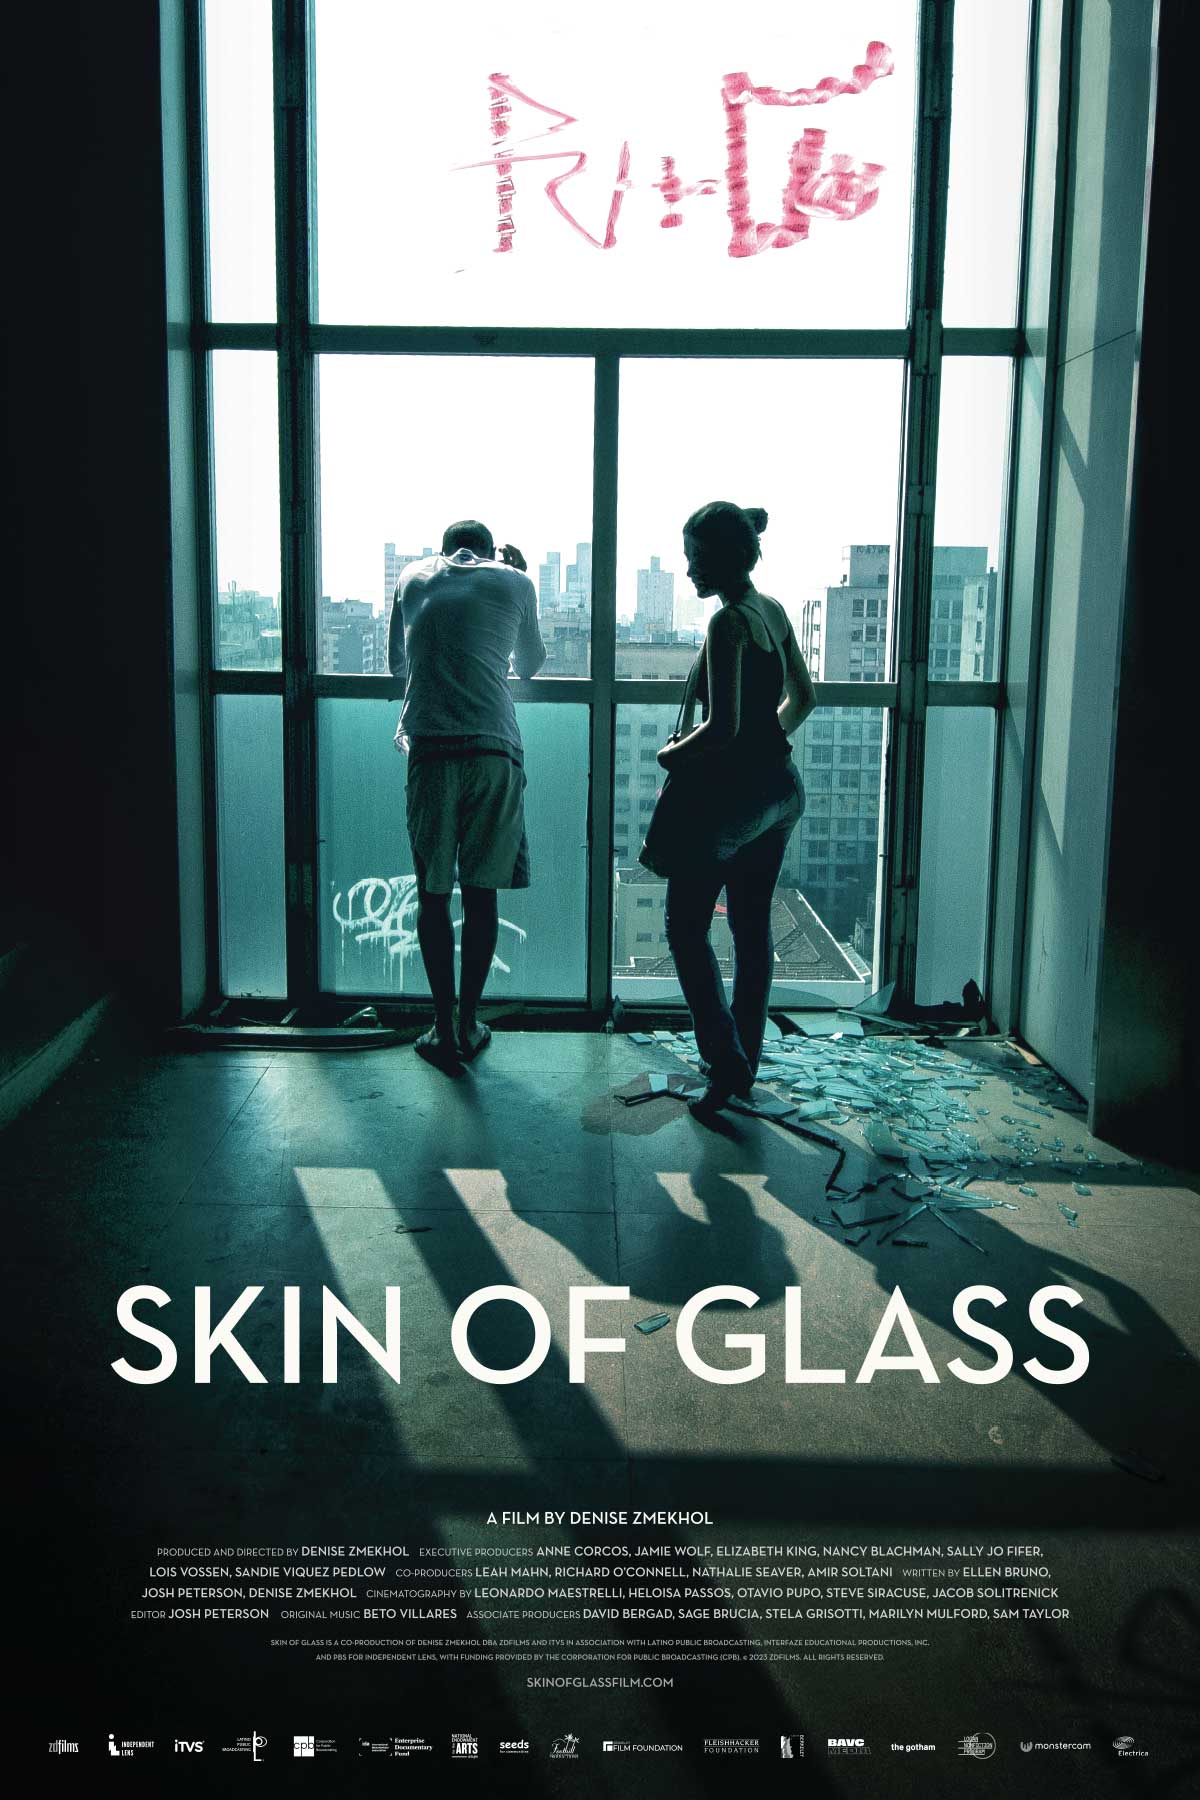 Promotional poster for Skin of Glass.